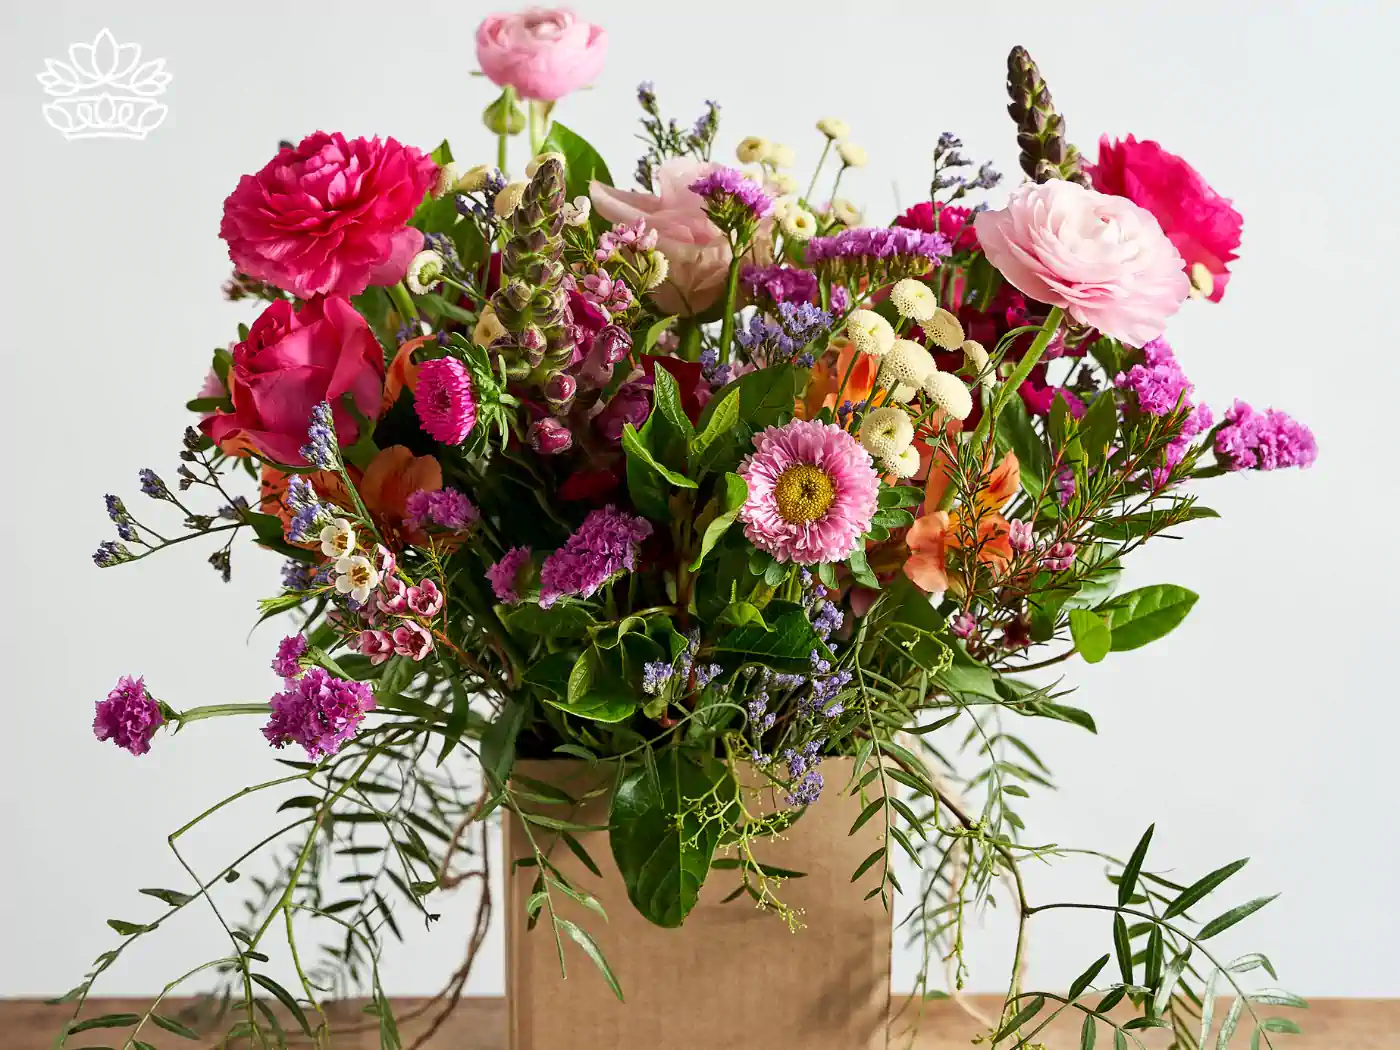 Lavish bouquet of vibrant roses, gerberas, and seasonal blooms in a rustic paper bag. Fabulous Flowers and Gifts, Guest House and Hotel Gift Boxes Delivered with Heart